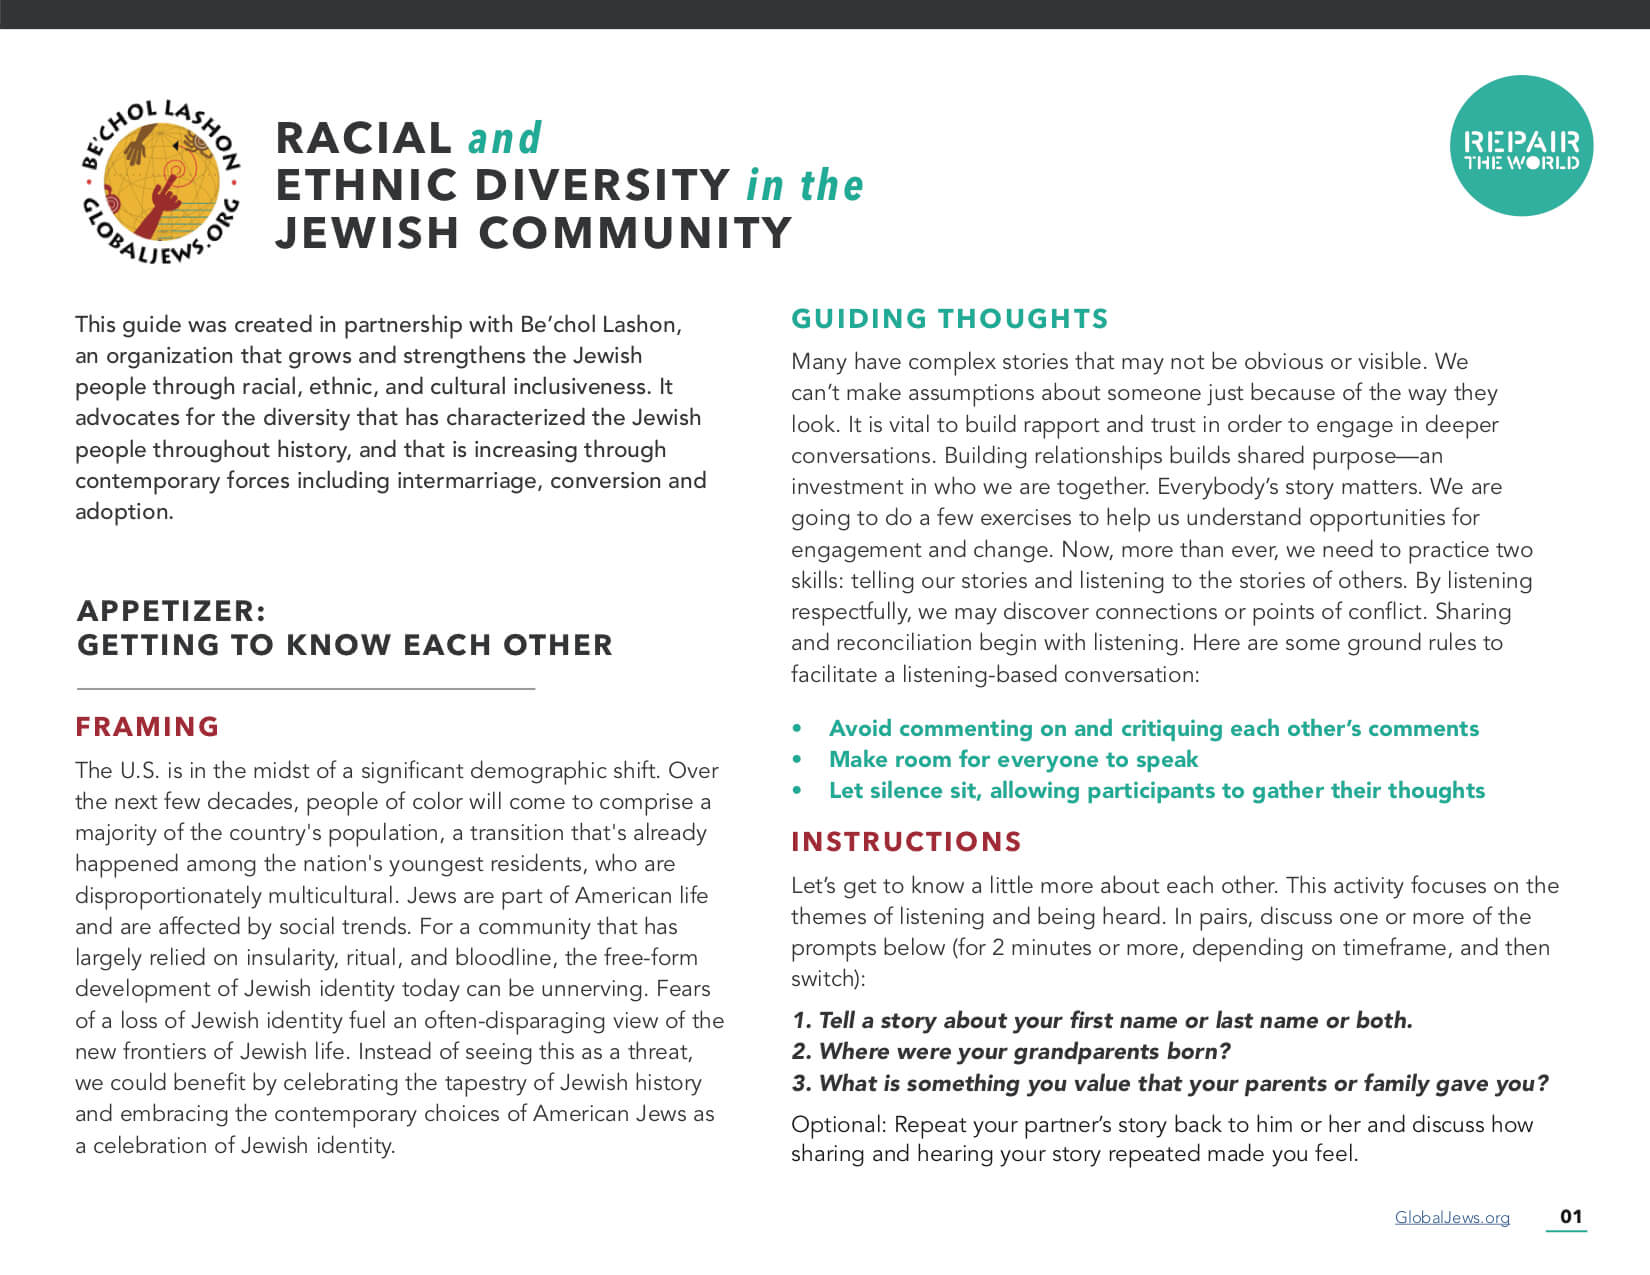 Racial and Ethnic Diversity in the Jewish Community